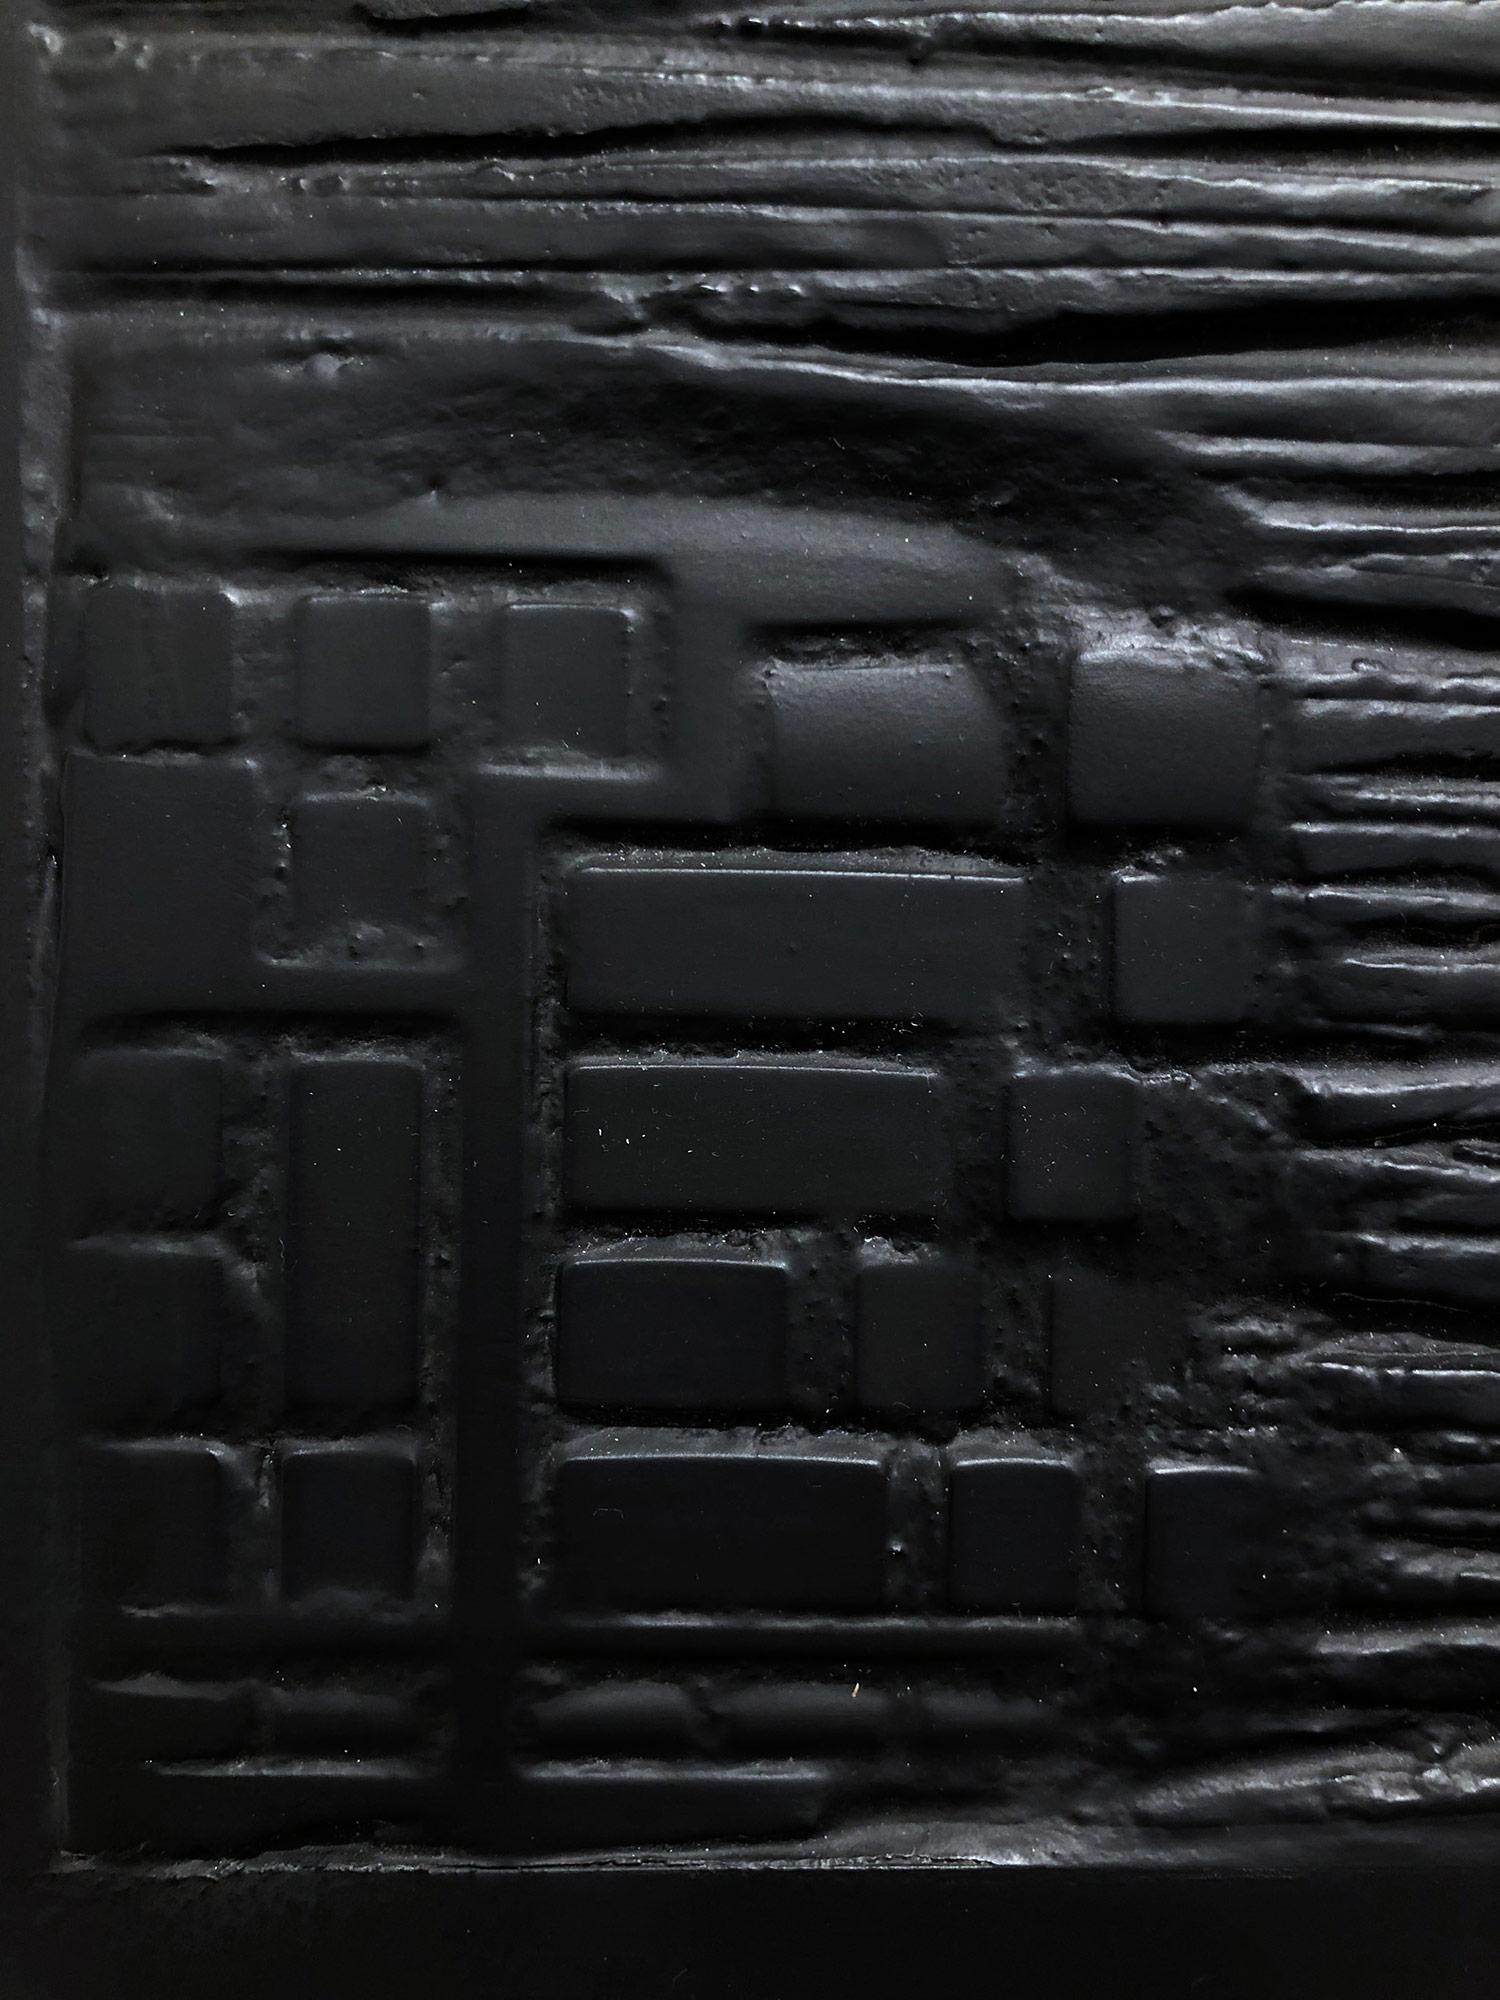 “Pen Decline 1 - 2 - 3 in Black” (Archeology series) Computer Keyboard Sculpture - Brown Abstract Painting by Daniel Fiorda